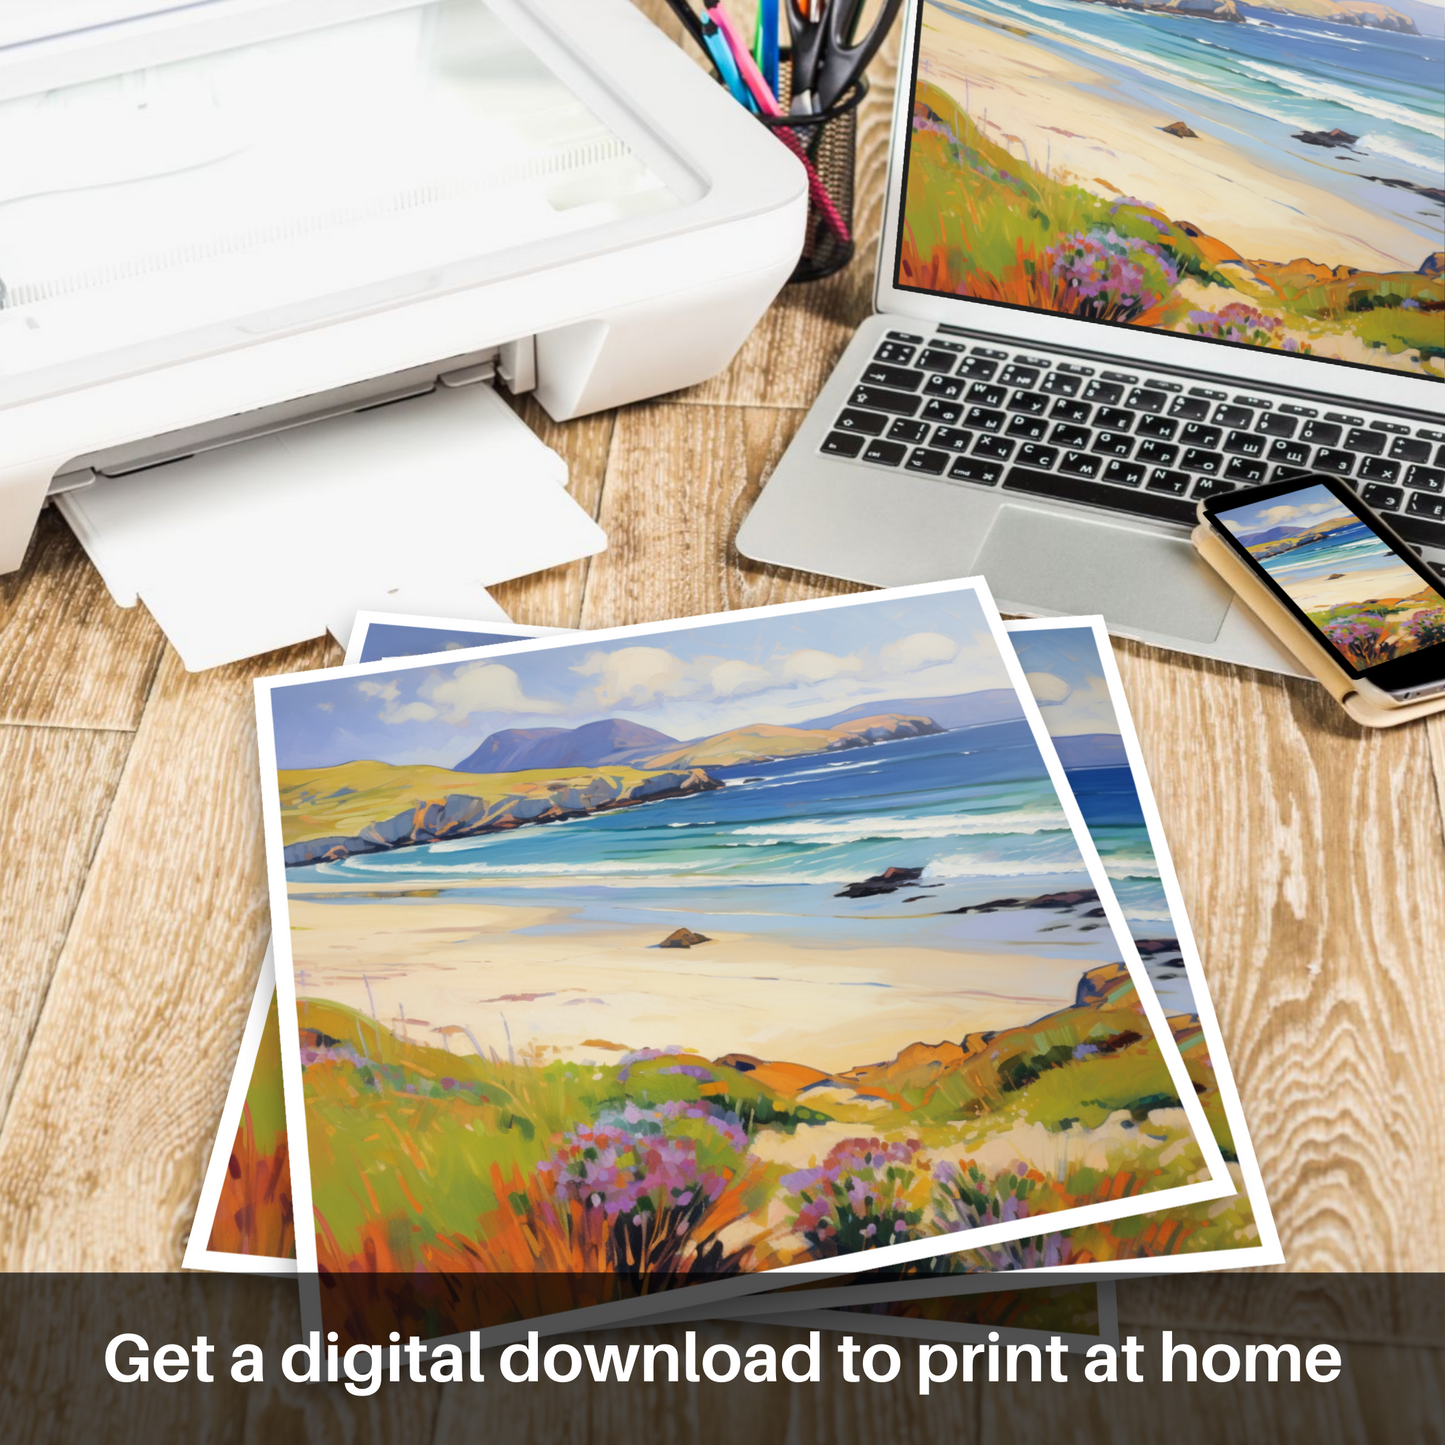 Downloadable and printable picture of Sandwood Bay, Sutherland in summer